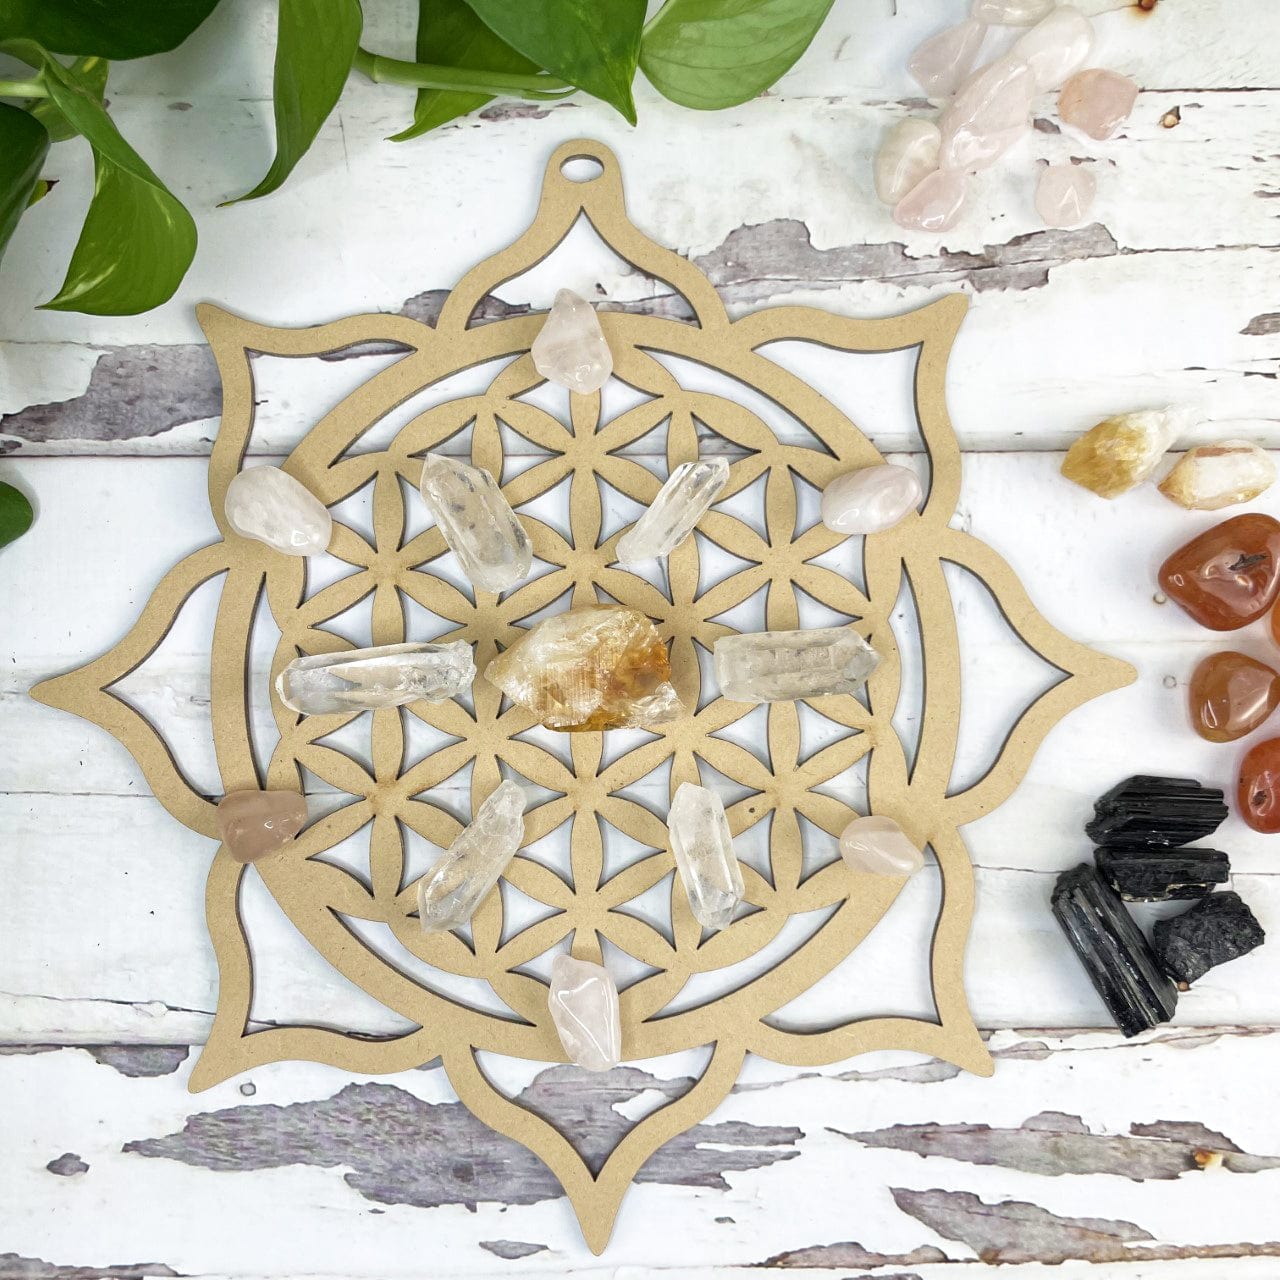 Crystal Grid - Flower of Life and Lotus Design with crystals placed on it